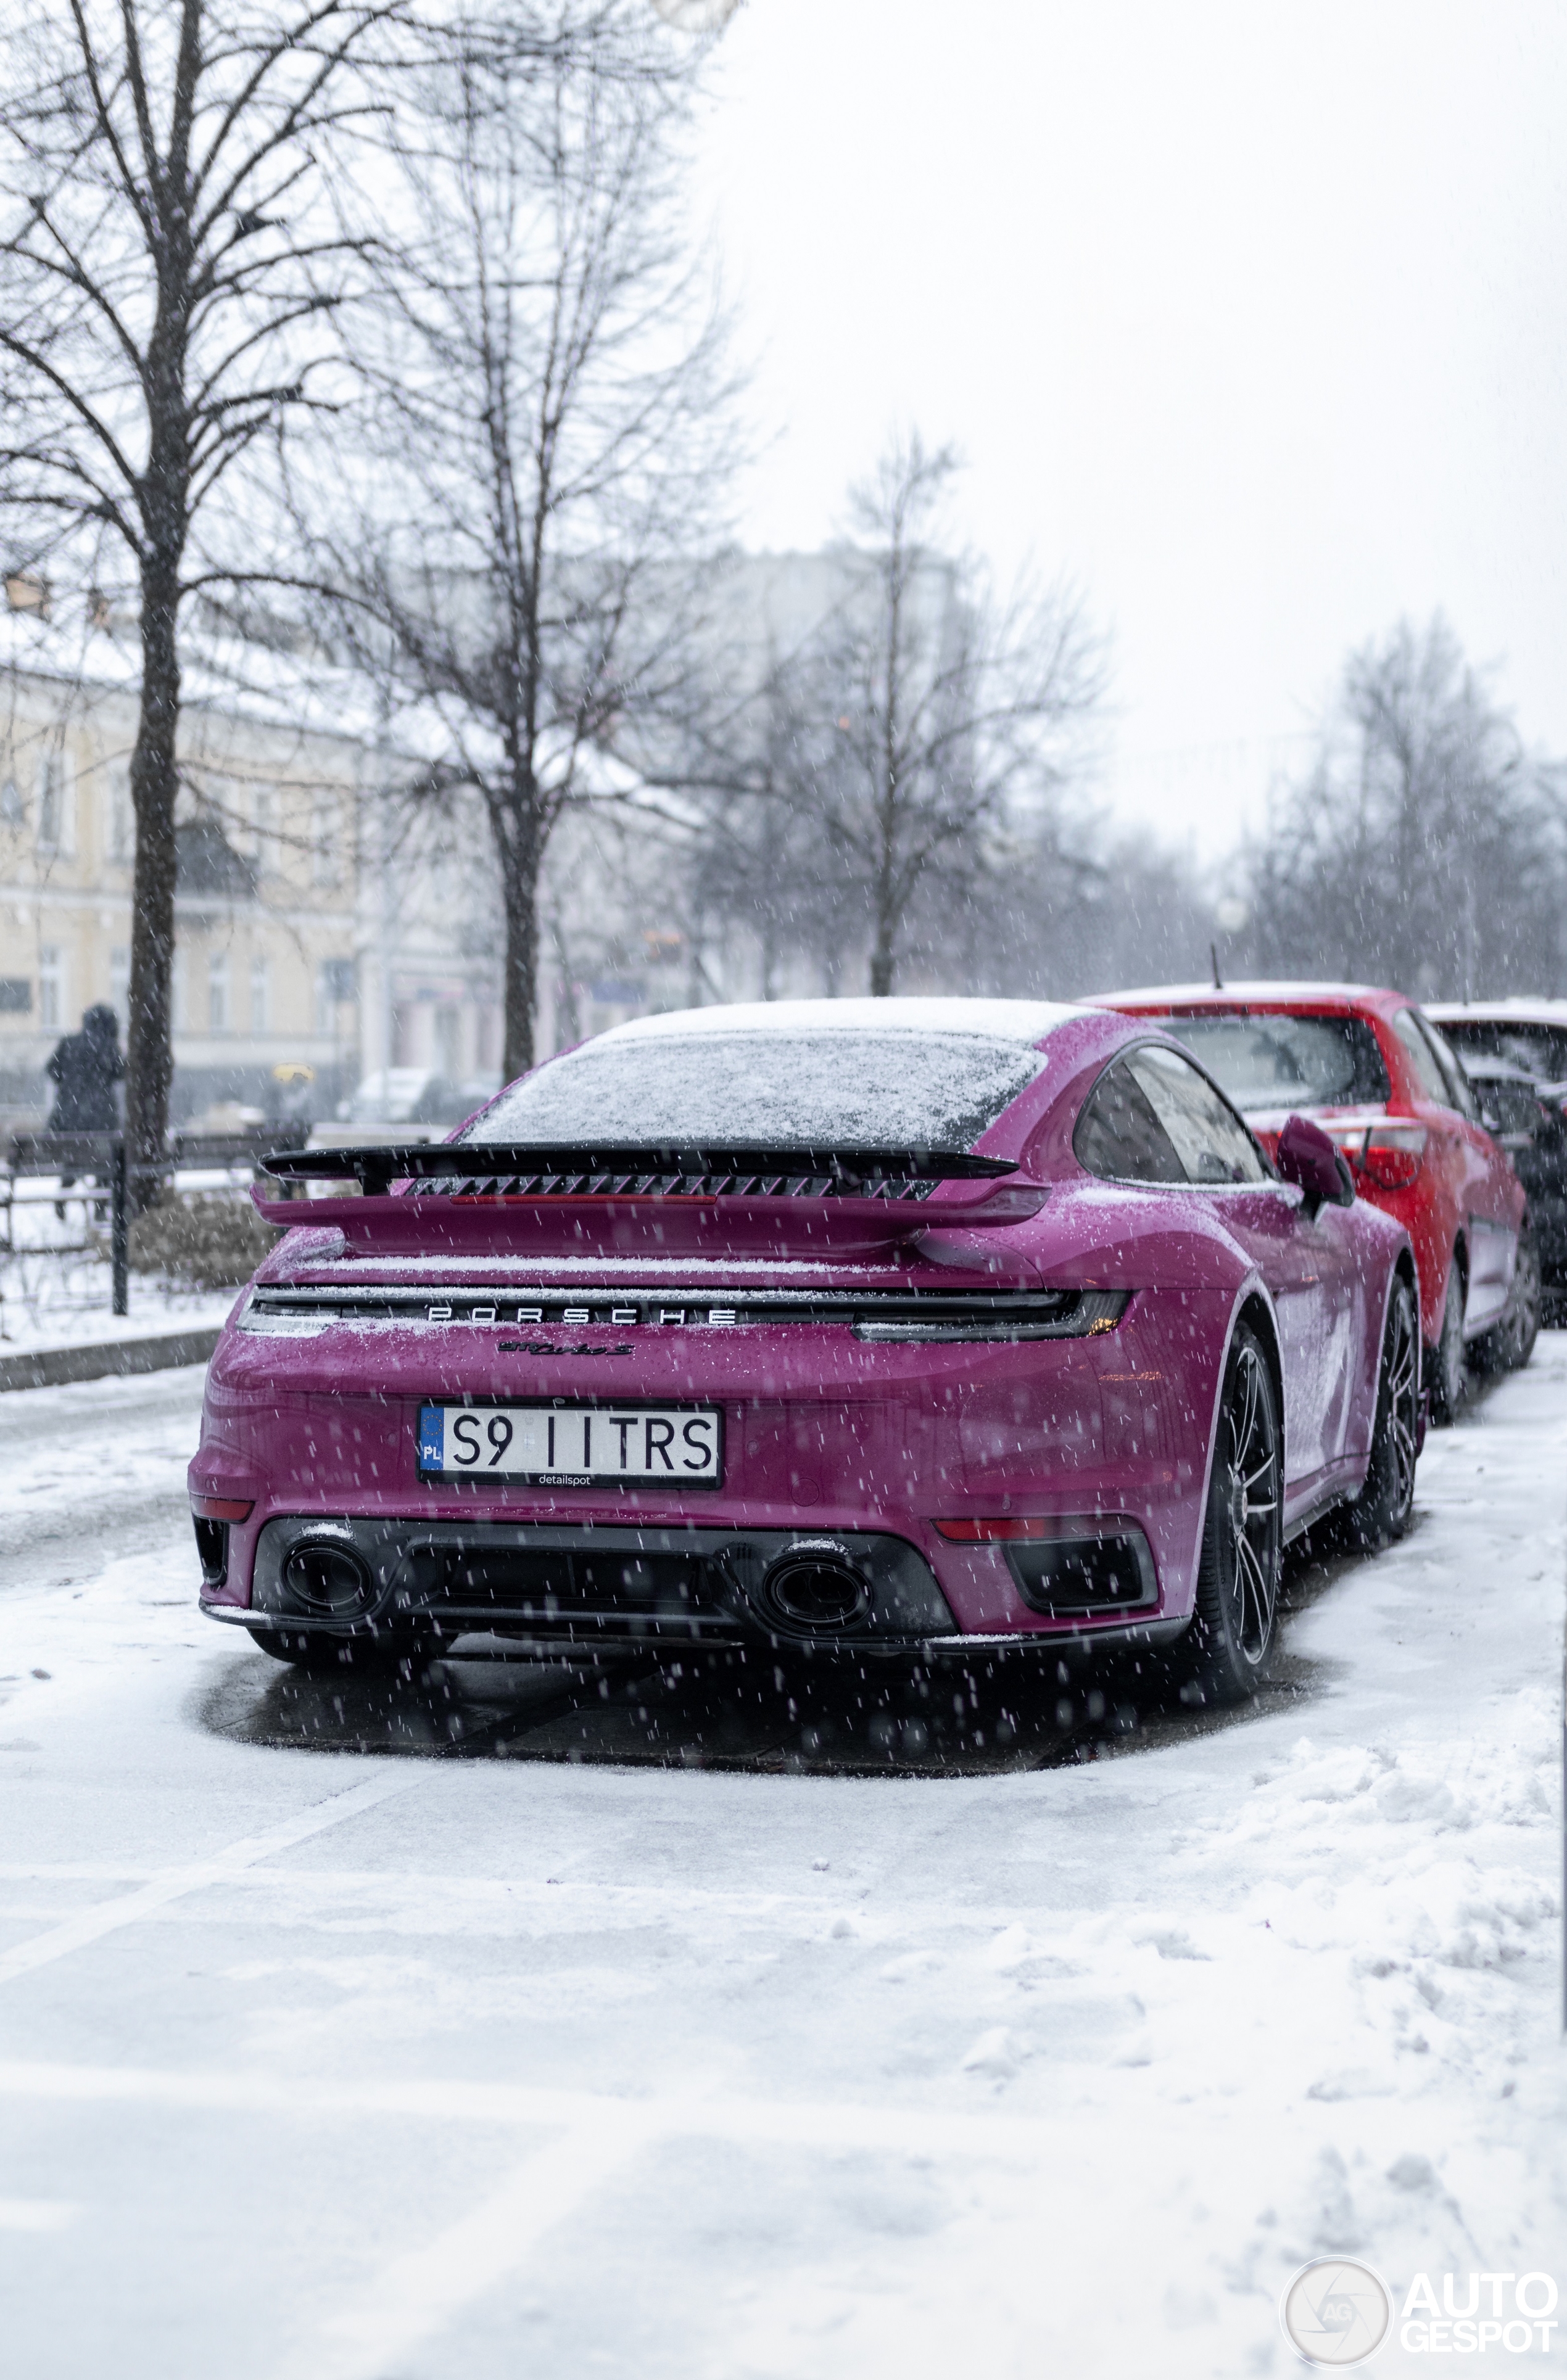 This Turbo S fits perfectly into the winter scene.